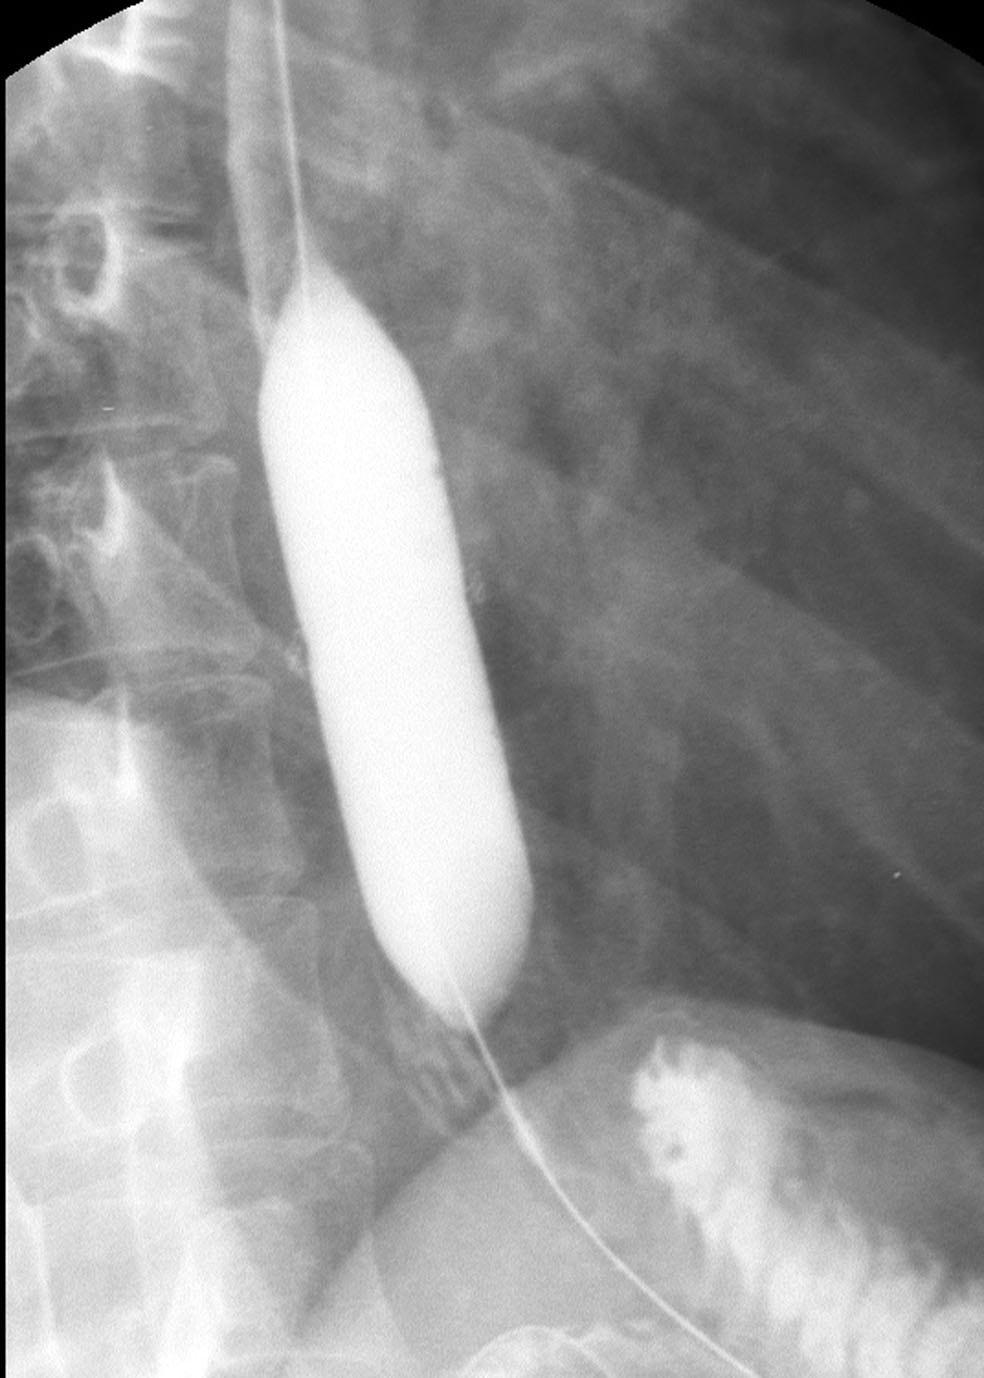 In one series (14), all 25 children with anastomotic strictures secondary to surgical repair of esophageal atresia, experienced symptom improvement following FG over a follow-up period from